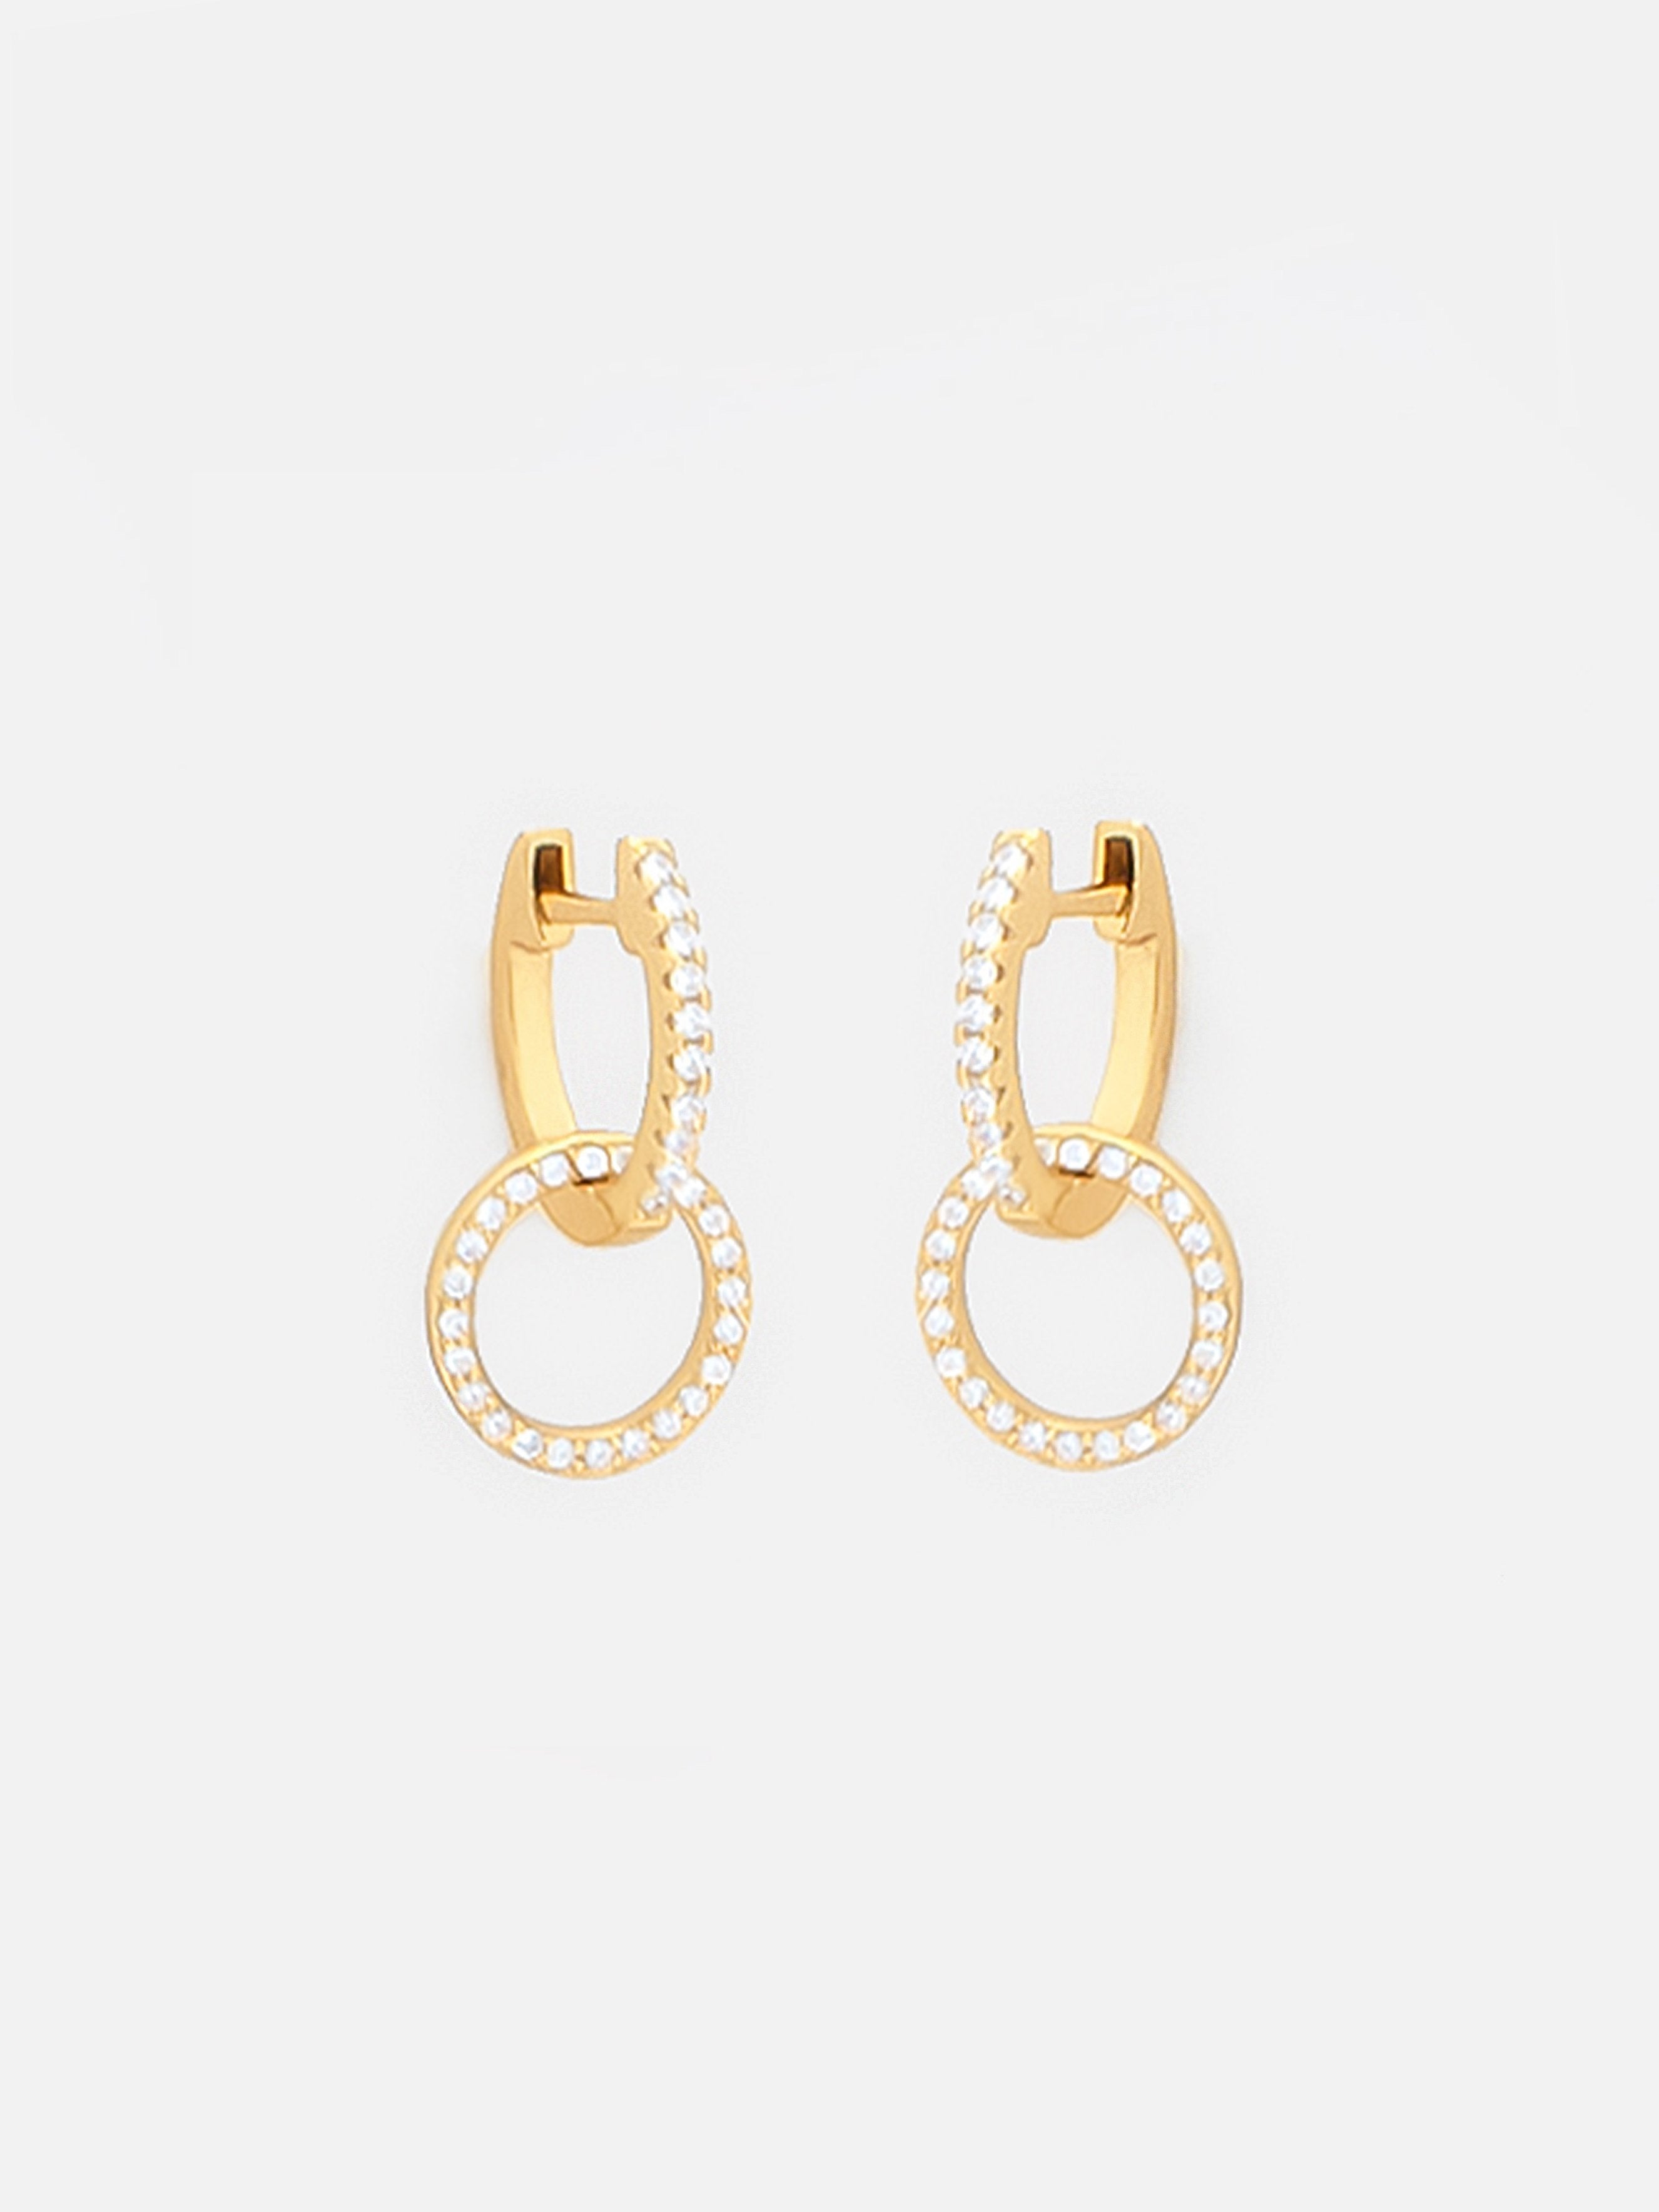 Gold Dangle Hoop Earrings With Round Removable Charms (18ct Gold Plated 925 Sterling Silver) - Muchv Jewellery